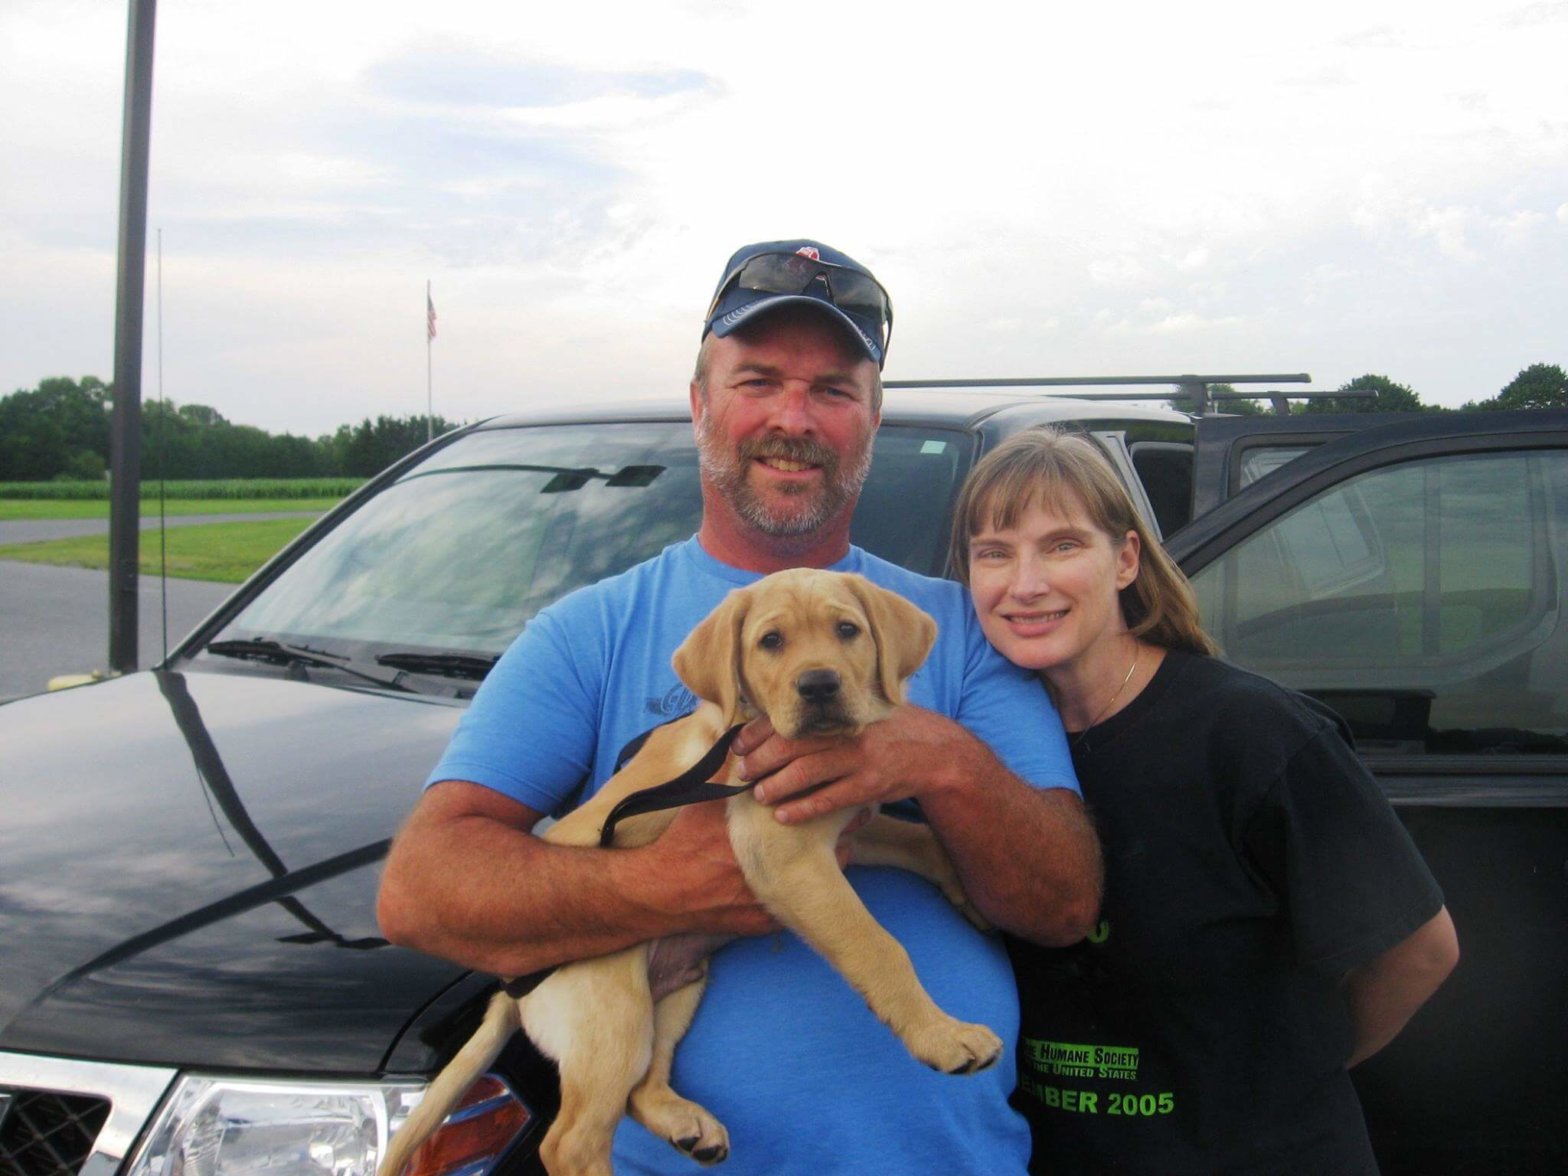 Marilyn and Scott stand in a parking lot with yellow lab puppy Casper in Scott's arms.